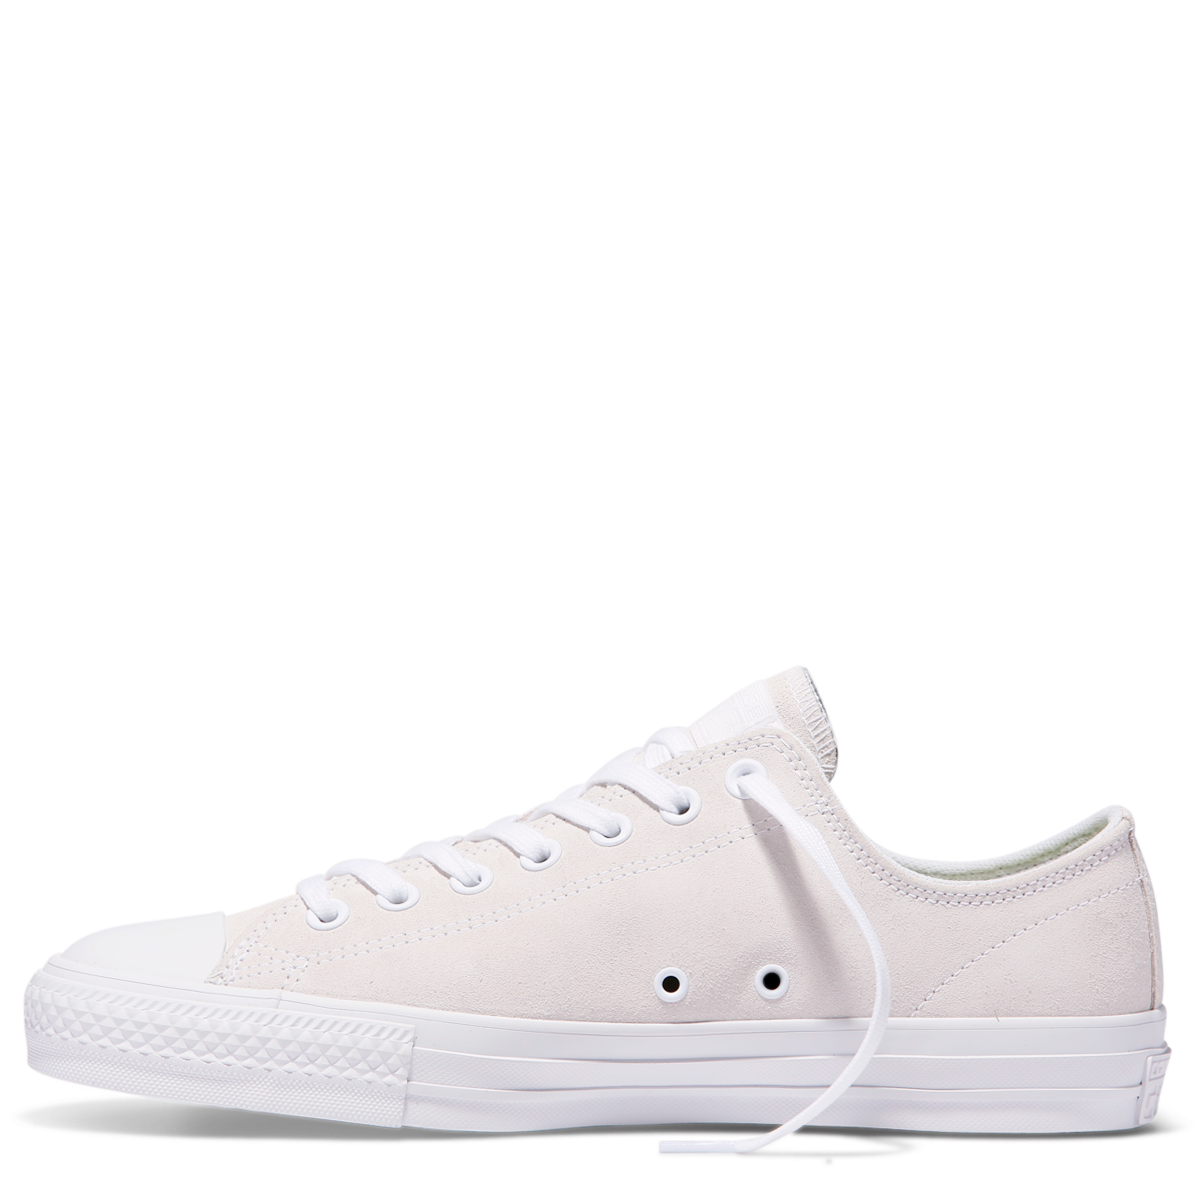 Converse CT All Star Pro Low Plush Suede White/White/Teal